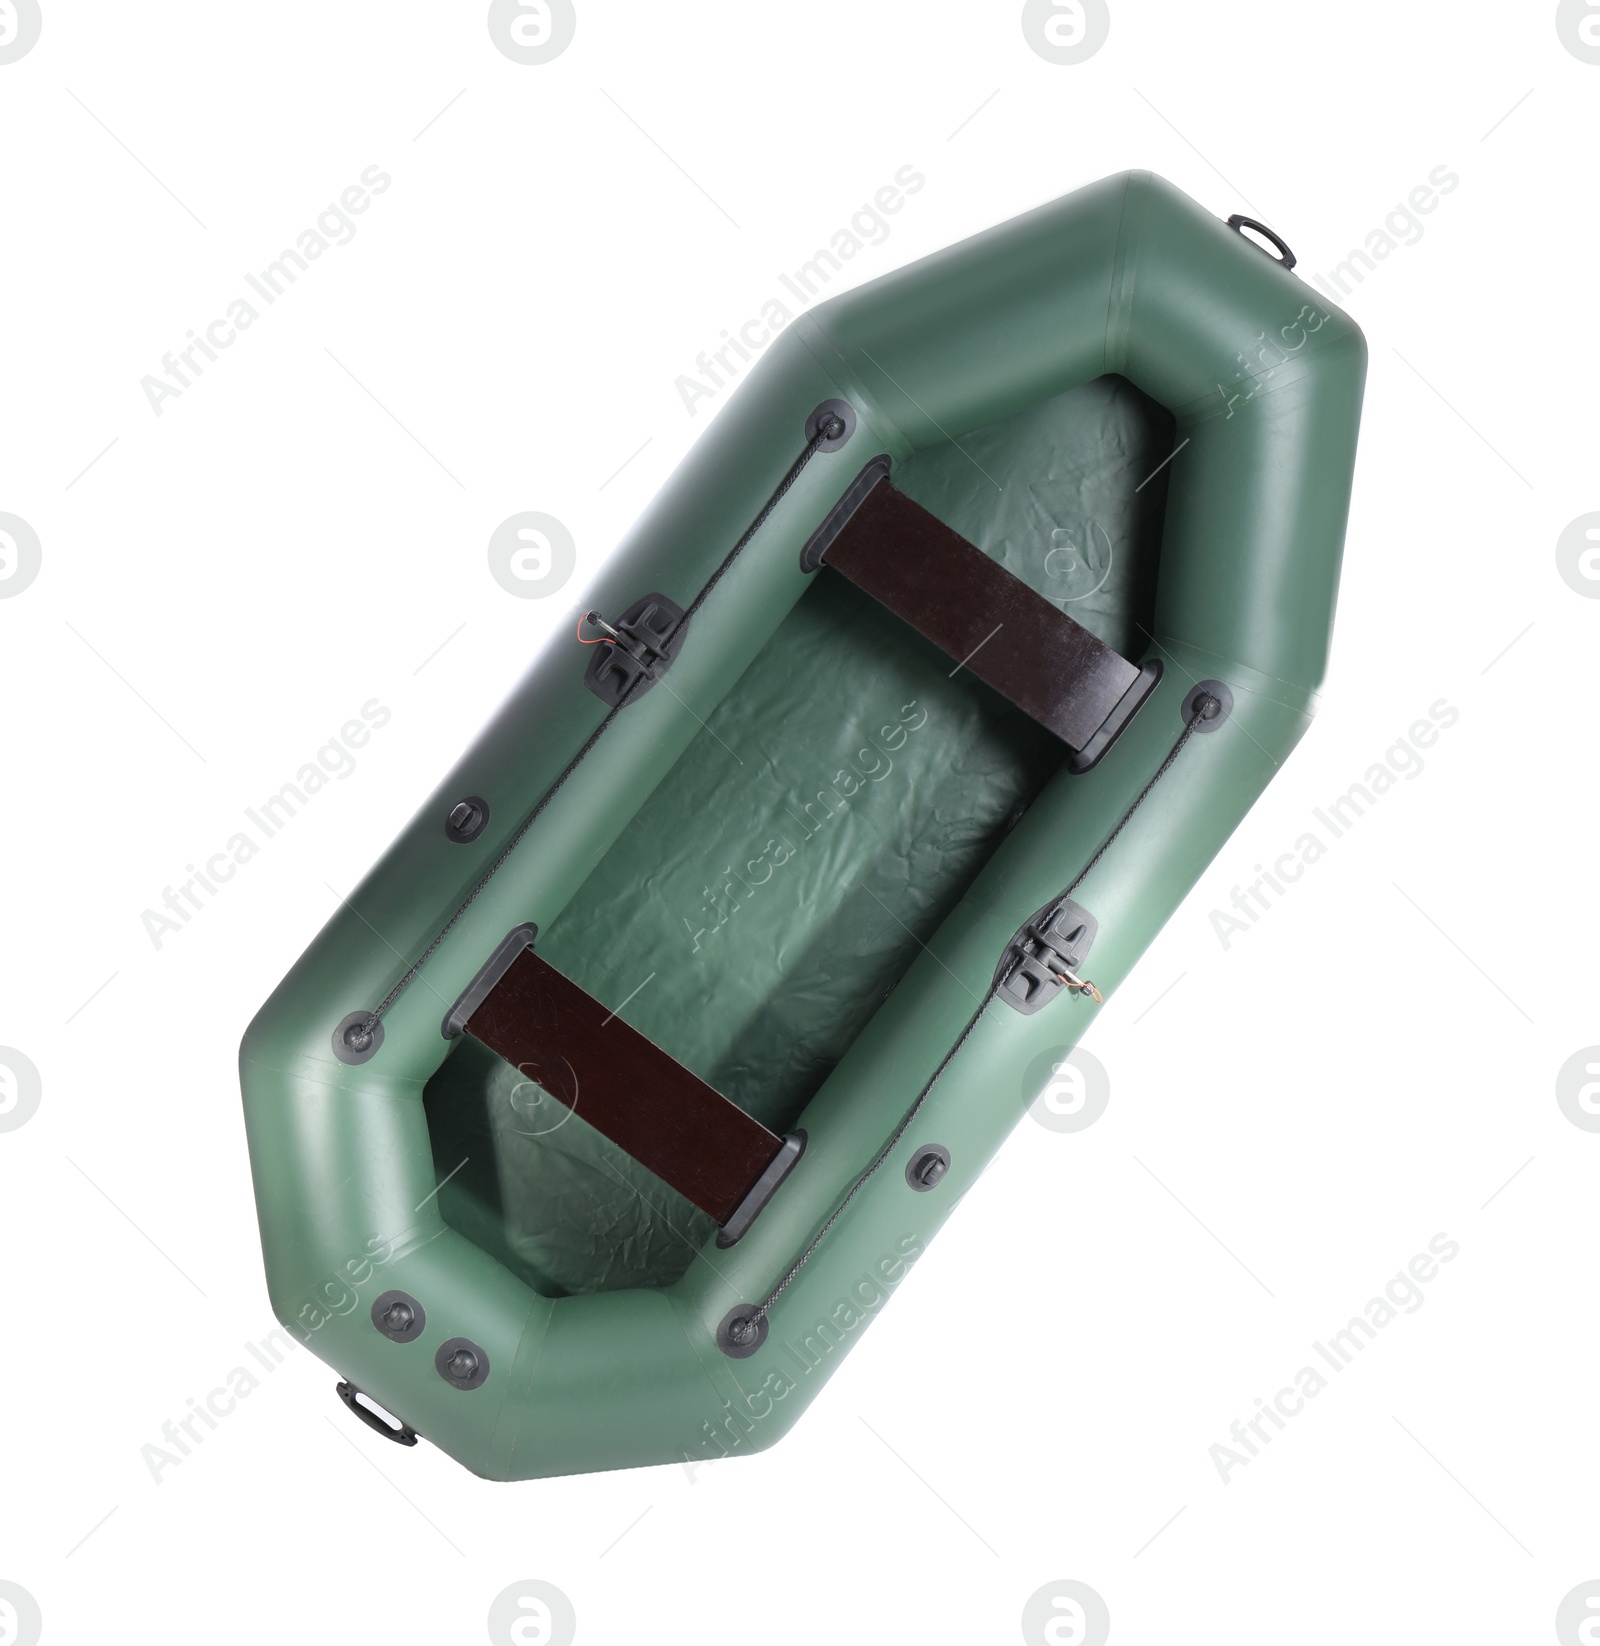 Photo of Inflatable rubber fishing boat on white background